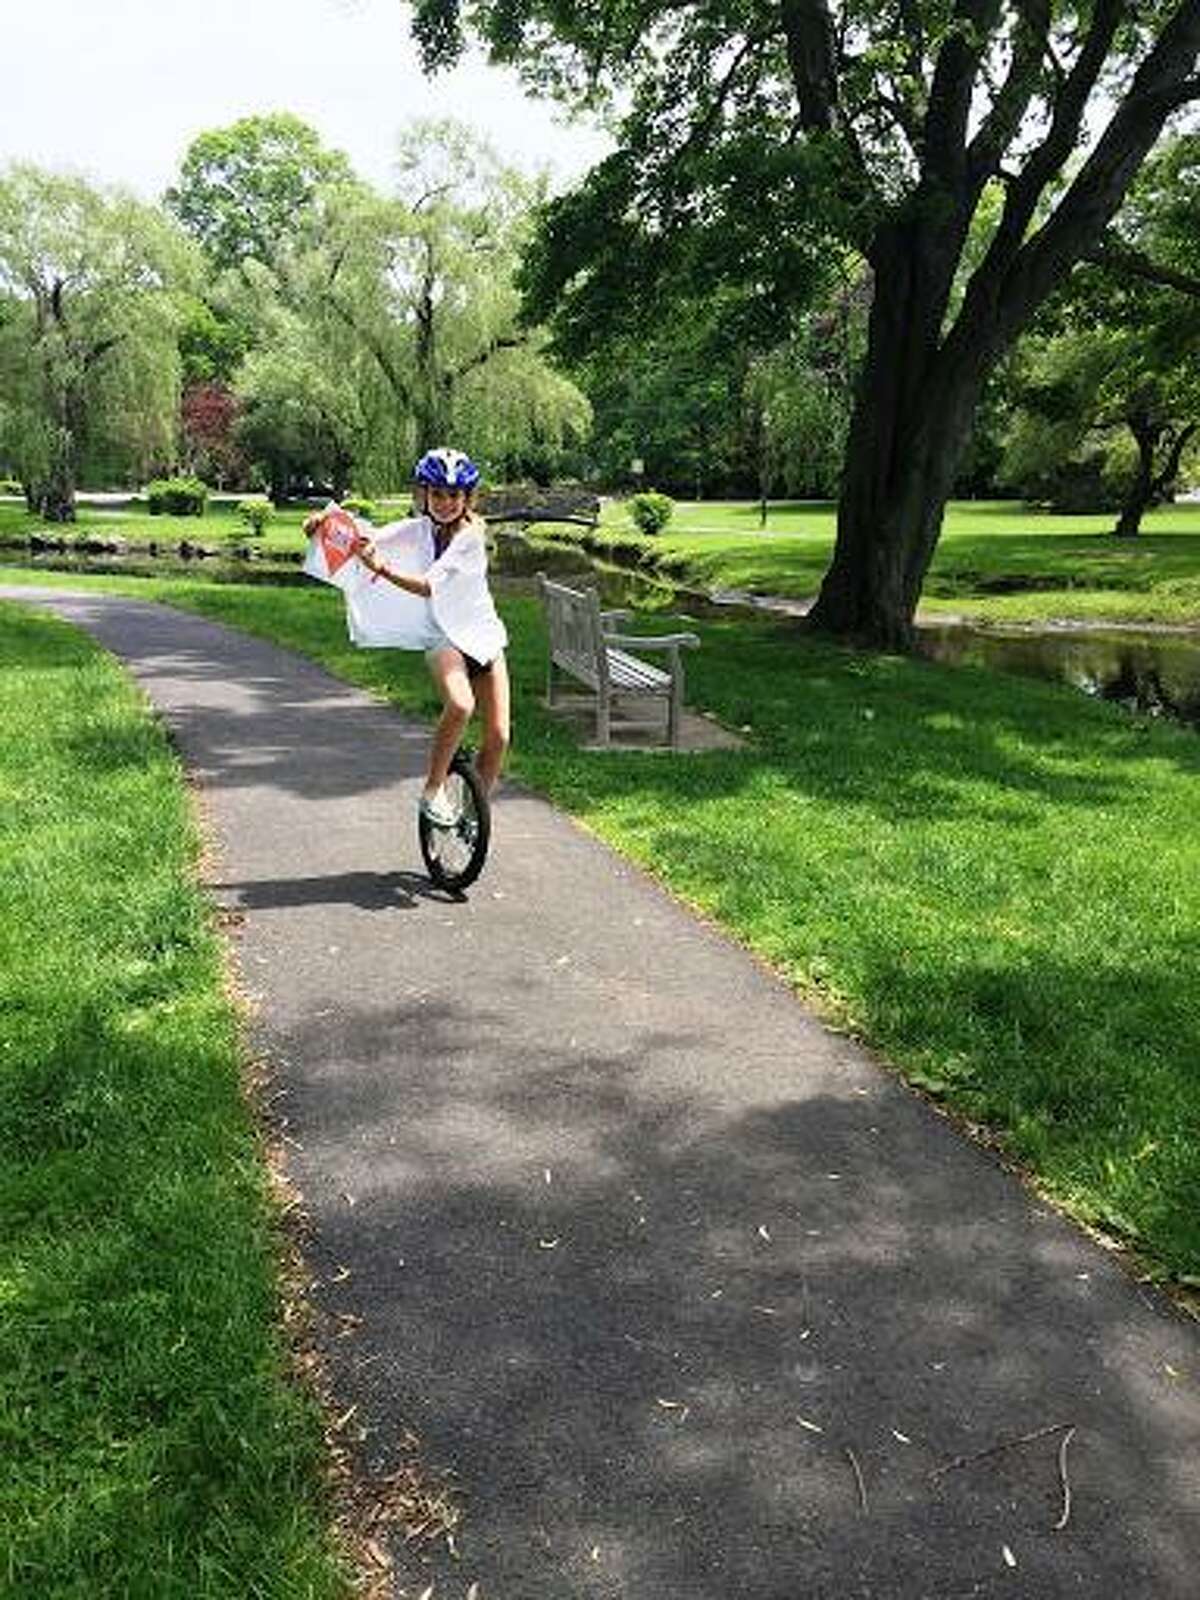 Photo submitted to the Greenwich Historical Society 2017 “This Place Matters!” contest: Binney Park, Old Greenwich, We love to come here and practice unicycling, walk the dog, ride our bikes down for a picnic, and we love the fireworks every year for the 4th of July! Ava Wallack